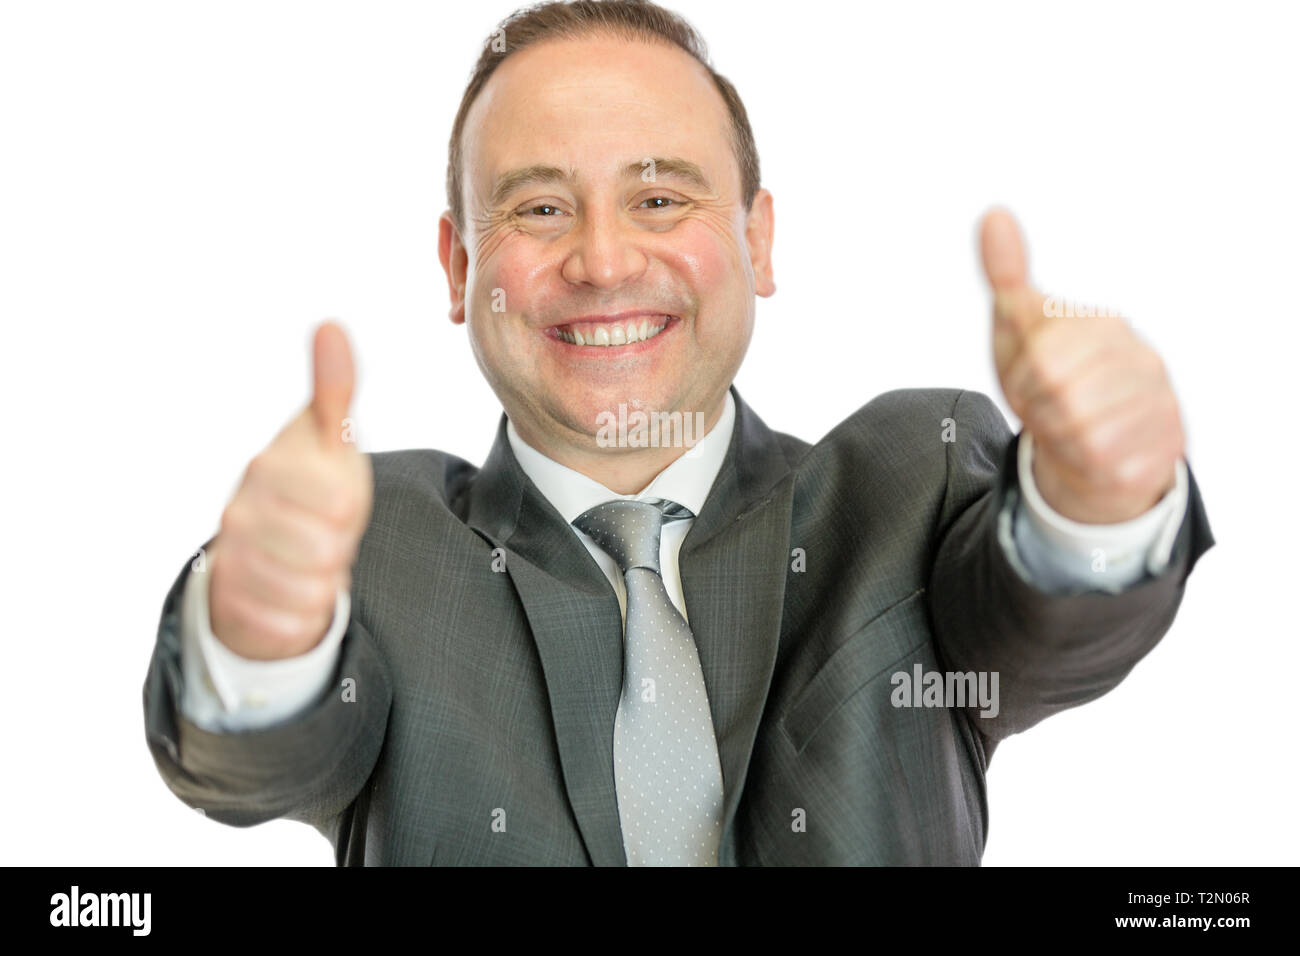 A happy, excited, mature businessman giving thumbs up signals with both hands on a white background with copy space. Stock Photo